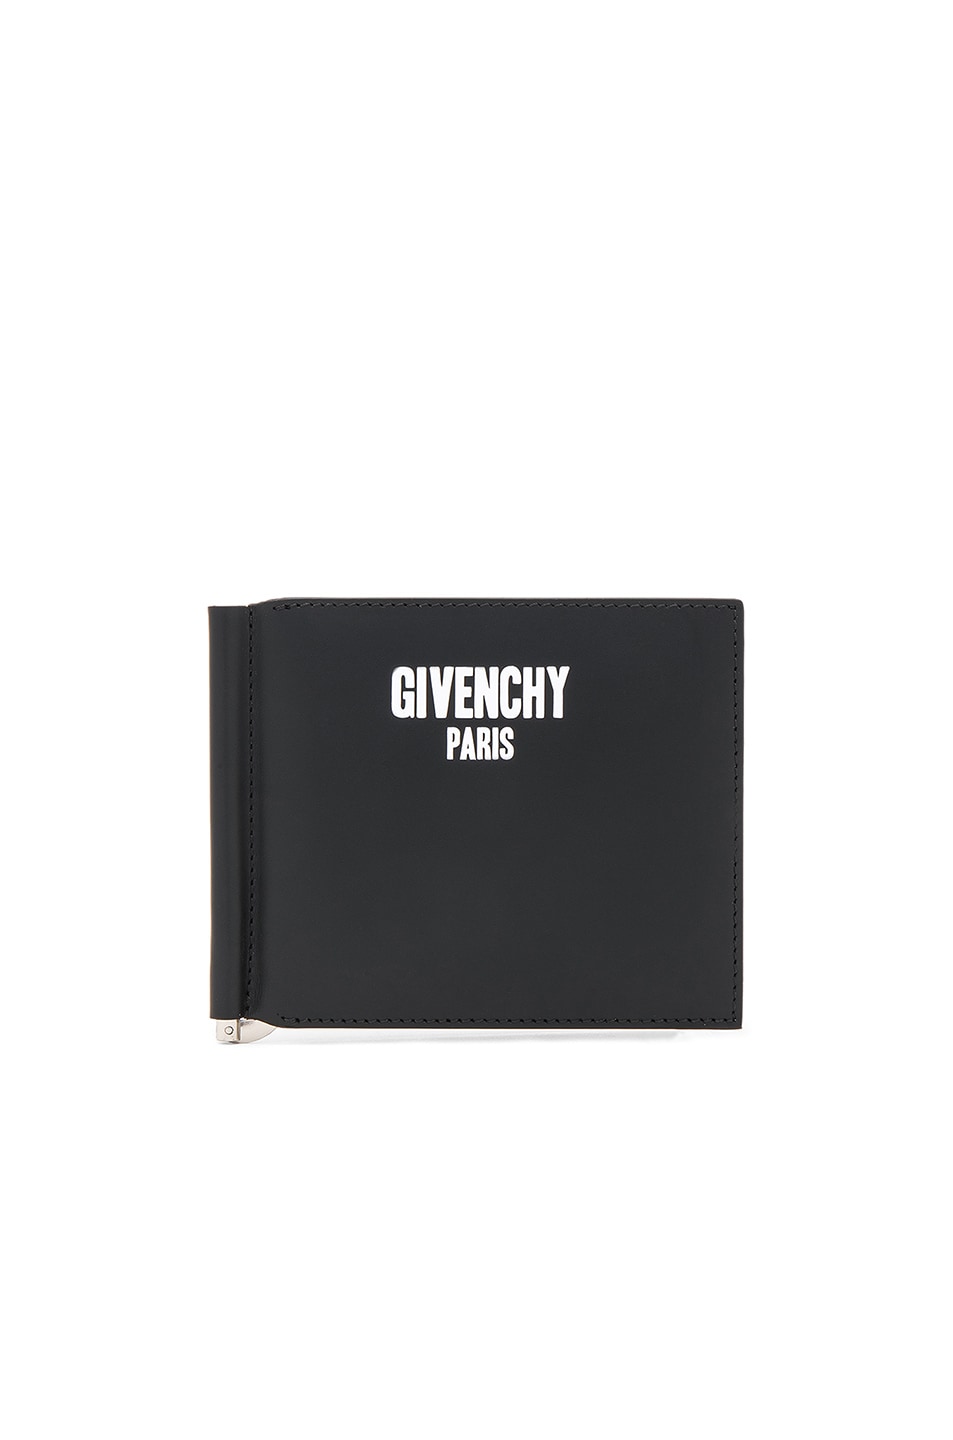 Image 1 of Givenchy Paris Print On Money Clip Wallet in Black